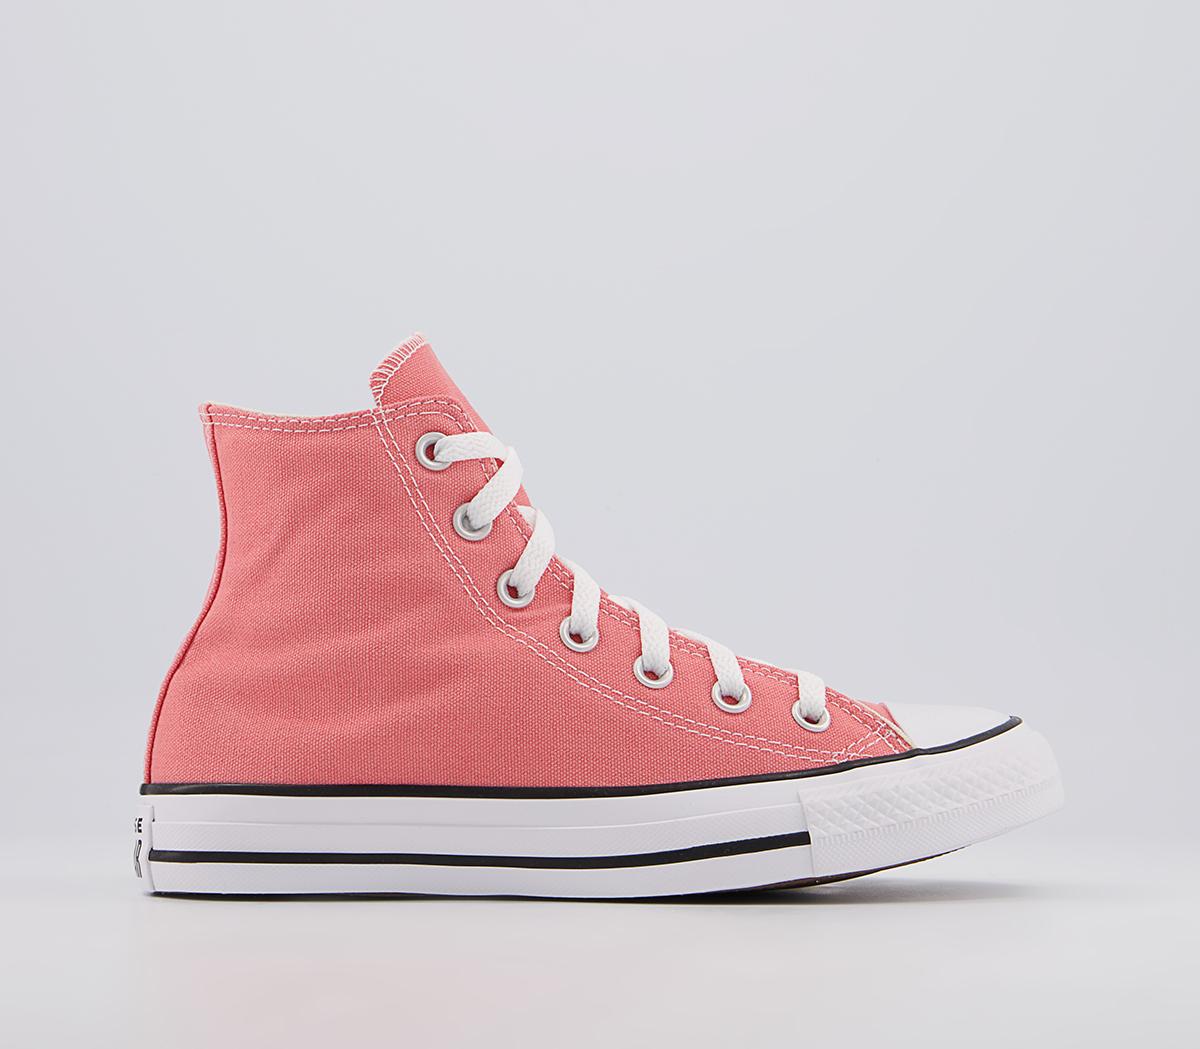 ConverseConverse All Star Hi TrainersPink Taffy